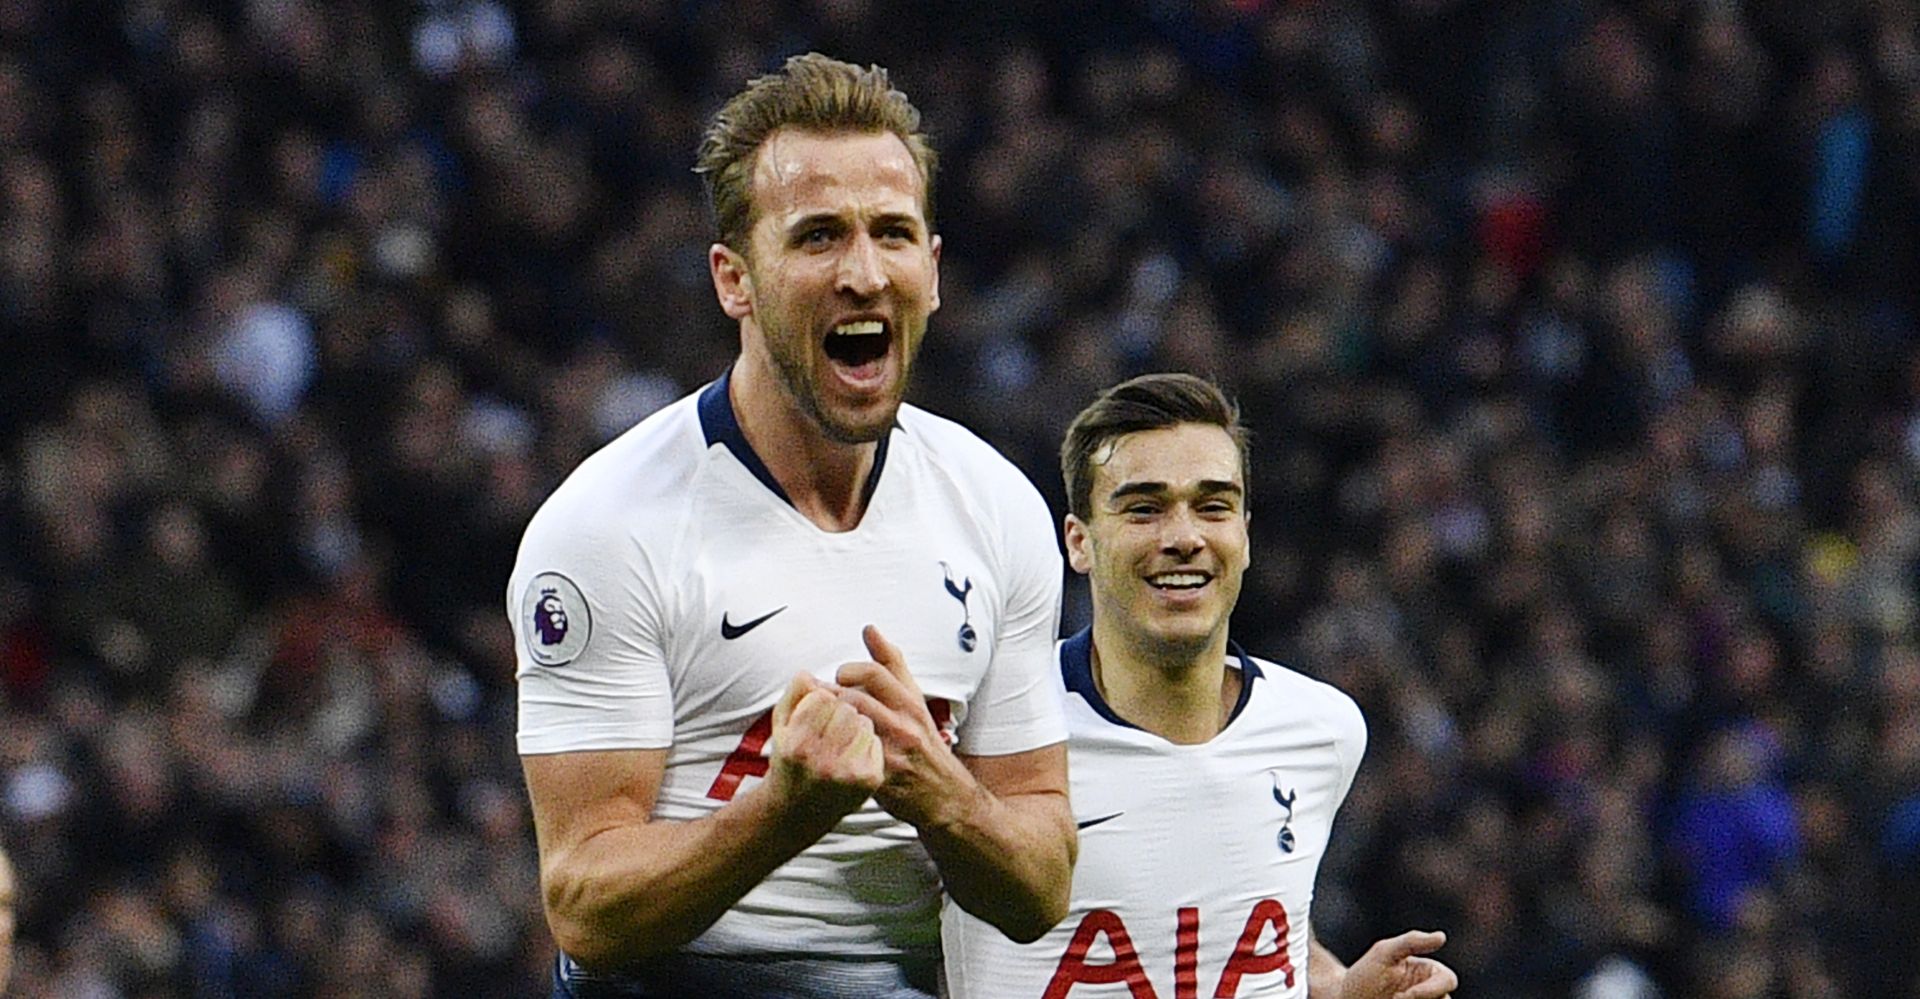 epa07252941 Tottenham Hotspur's Harry Kane (L) celebrates scoring a goal during the English Premier League soccer match between Tottenham Hotspur and Wolverhampton Wanderers at Wembley Stadium in London, Britain, 29 December 2018.  EPA/NEIL HALL EDITORIAL USE ONLY. No use with unauthorized audio, video, data, fixture lists, club/league logos or 'live' services. Online in-match use limited to 120 images, no video emulation. No use in betting, games or single club/league/player publications.